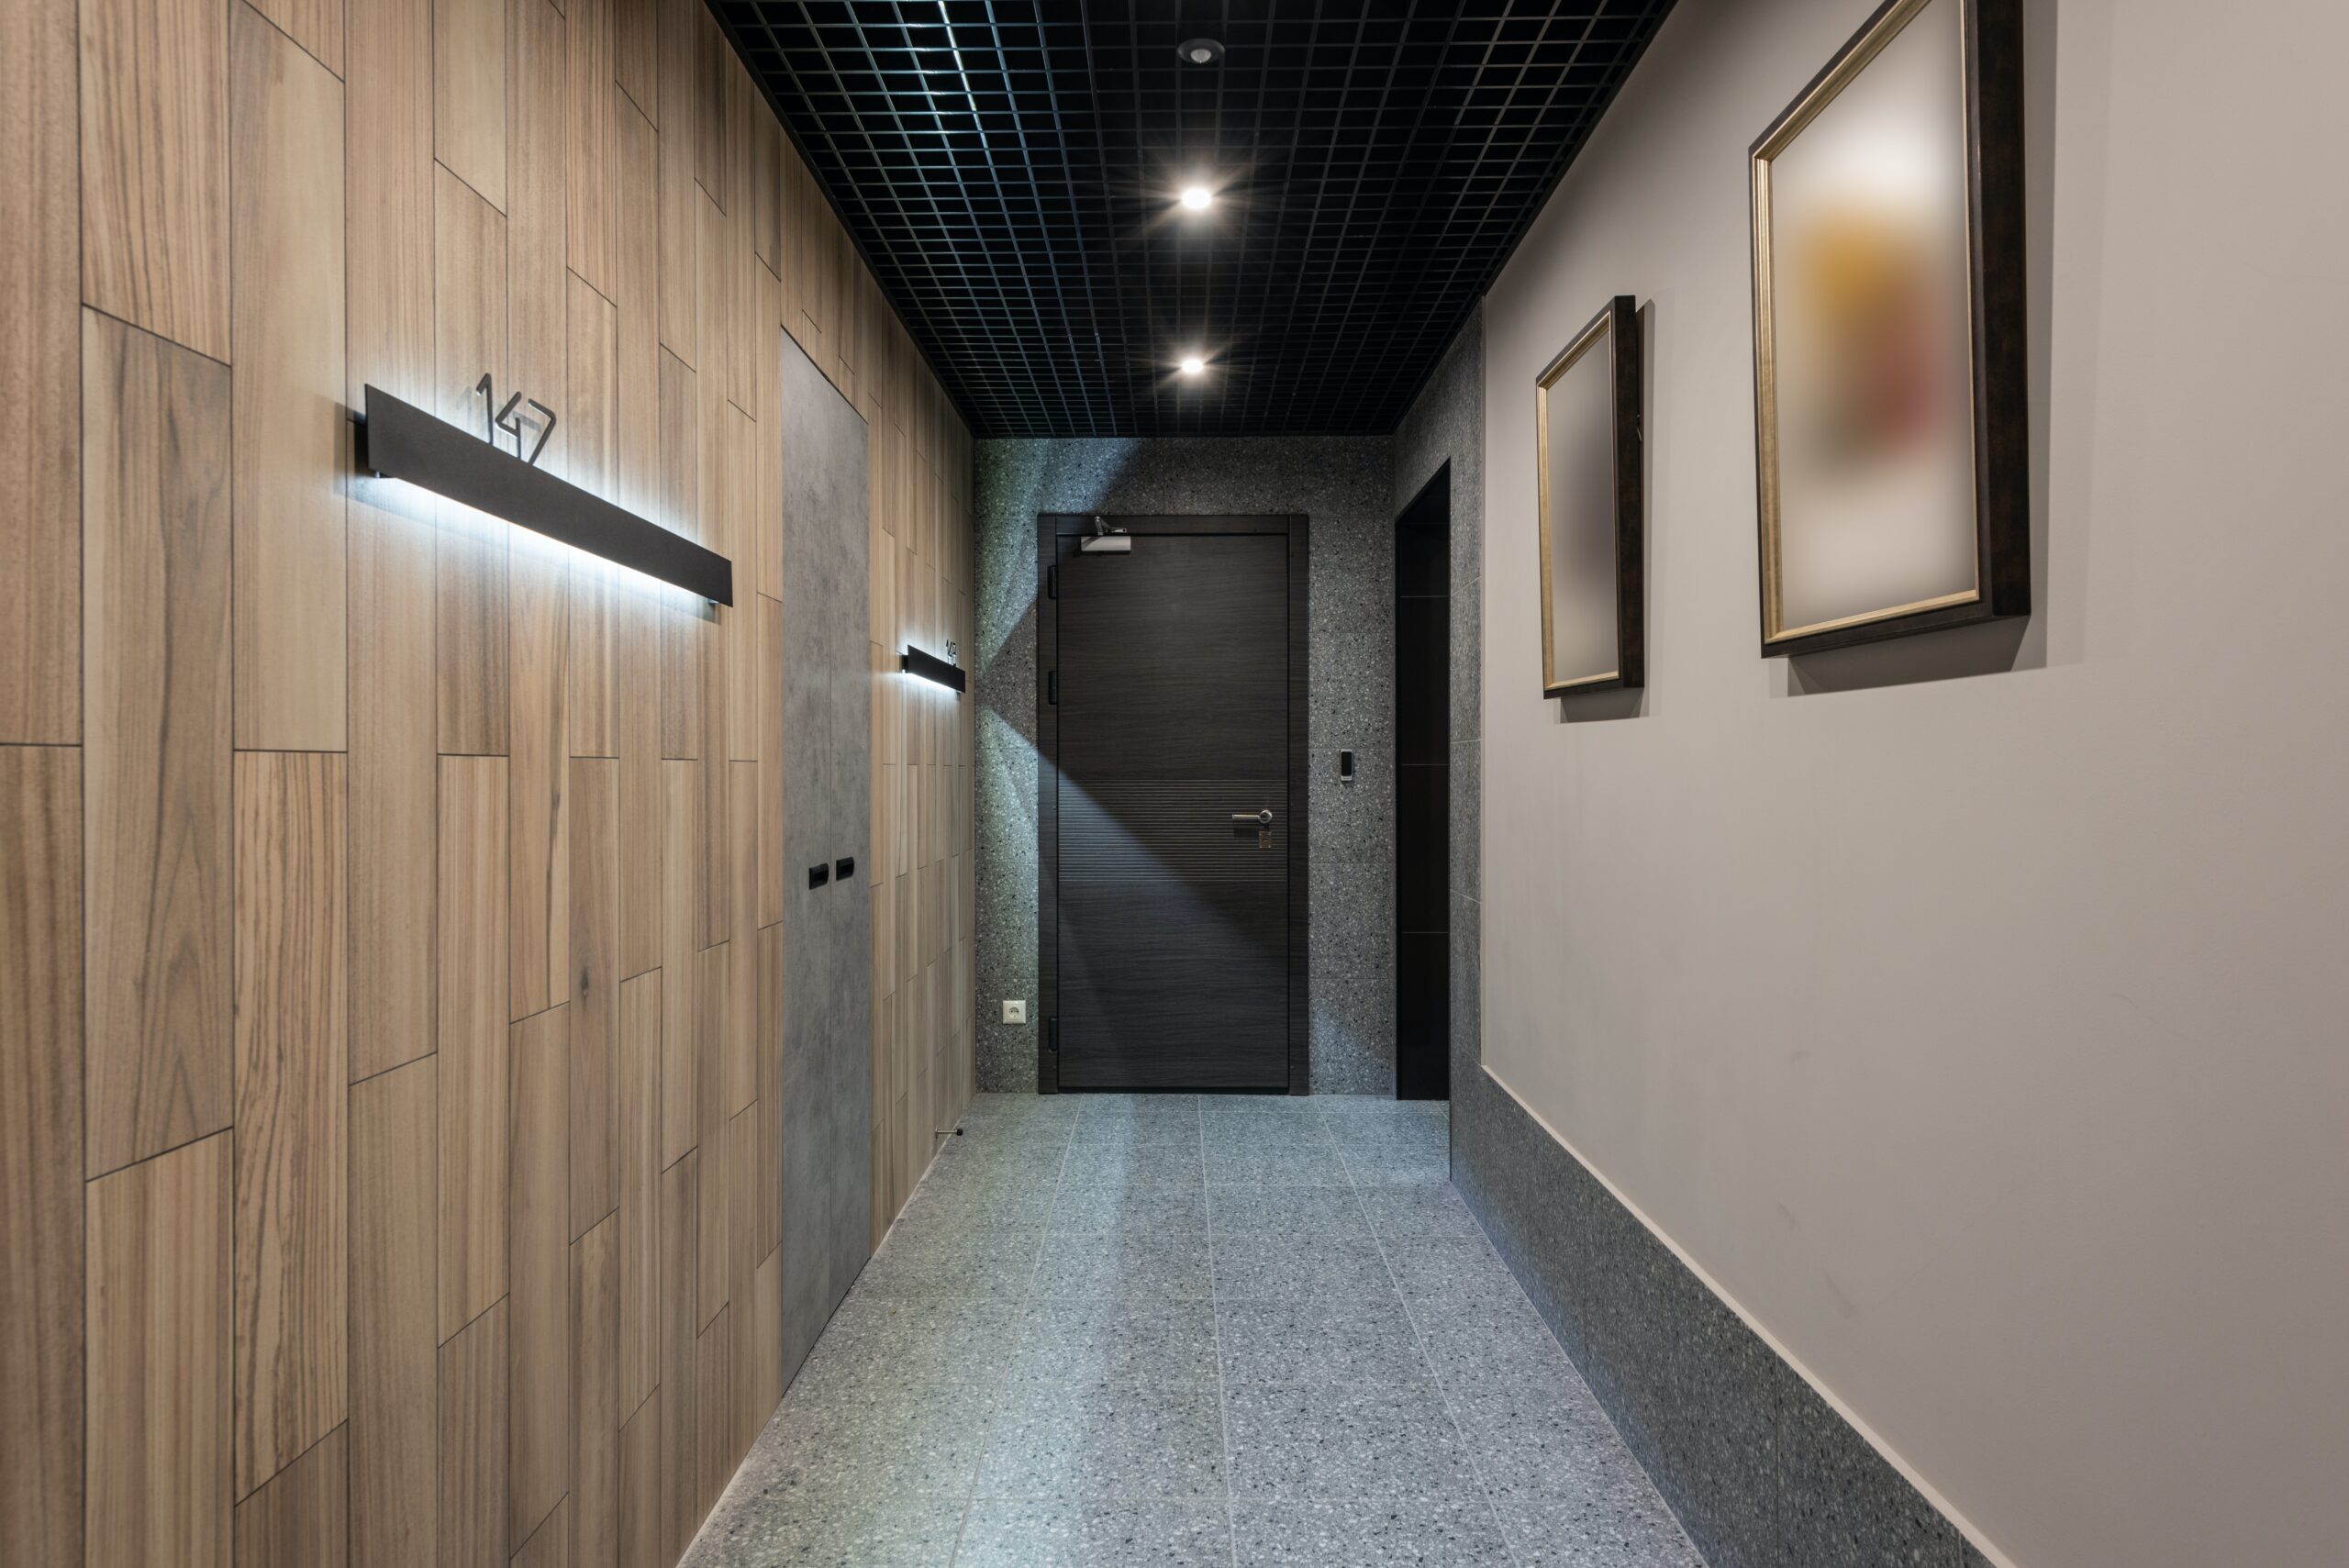 Consider The Size And Shape Of Your Hallway When Selecting A Lighting Fixture